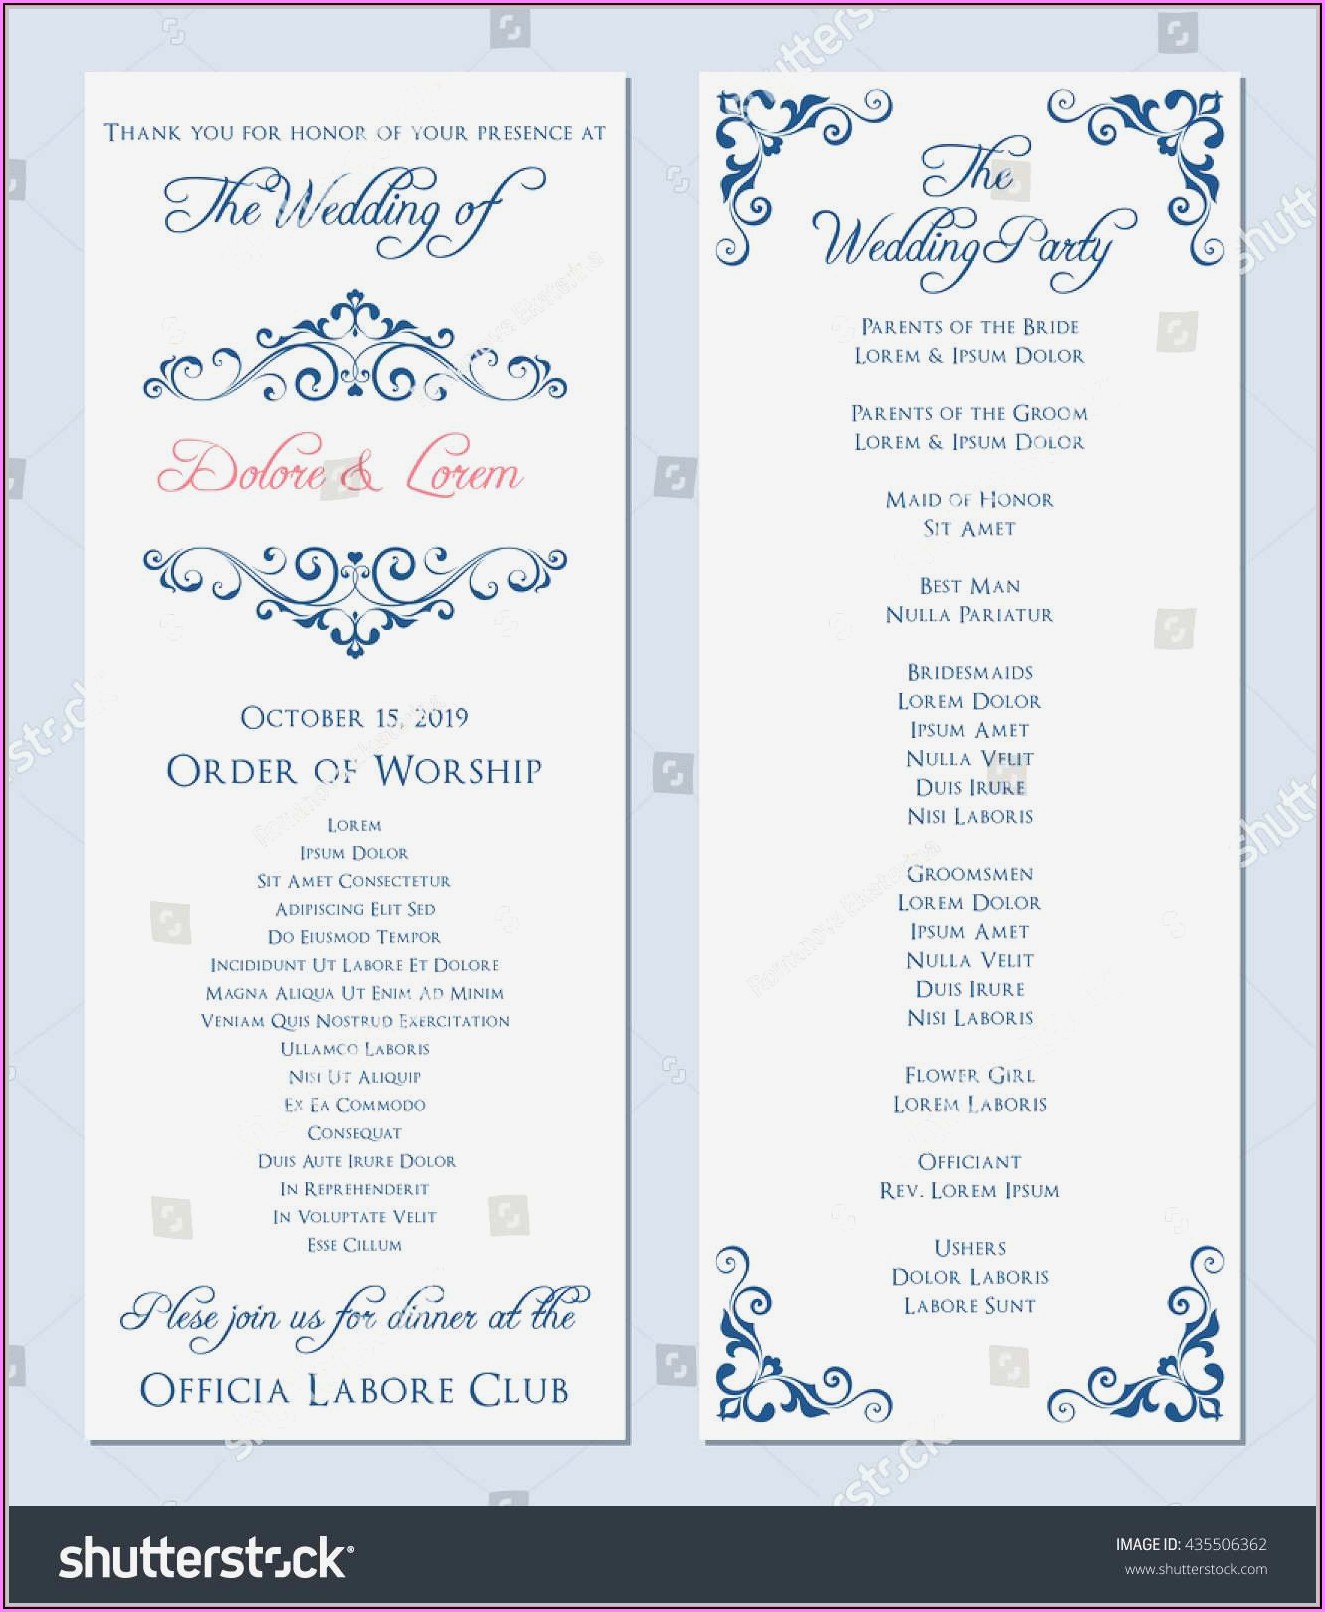 Free One Page Wedding Program Templates For Microsoft Word